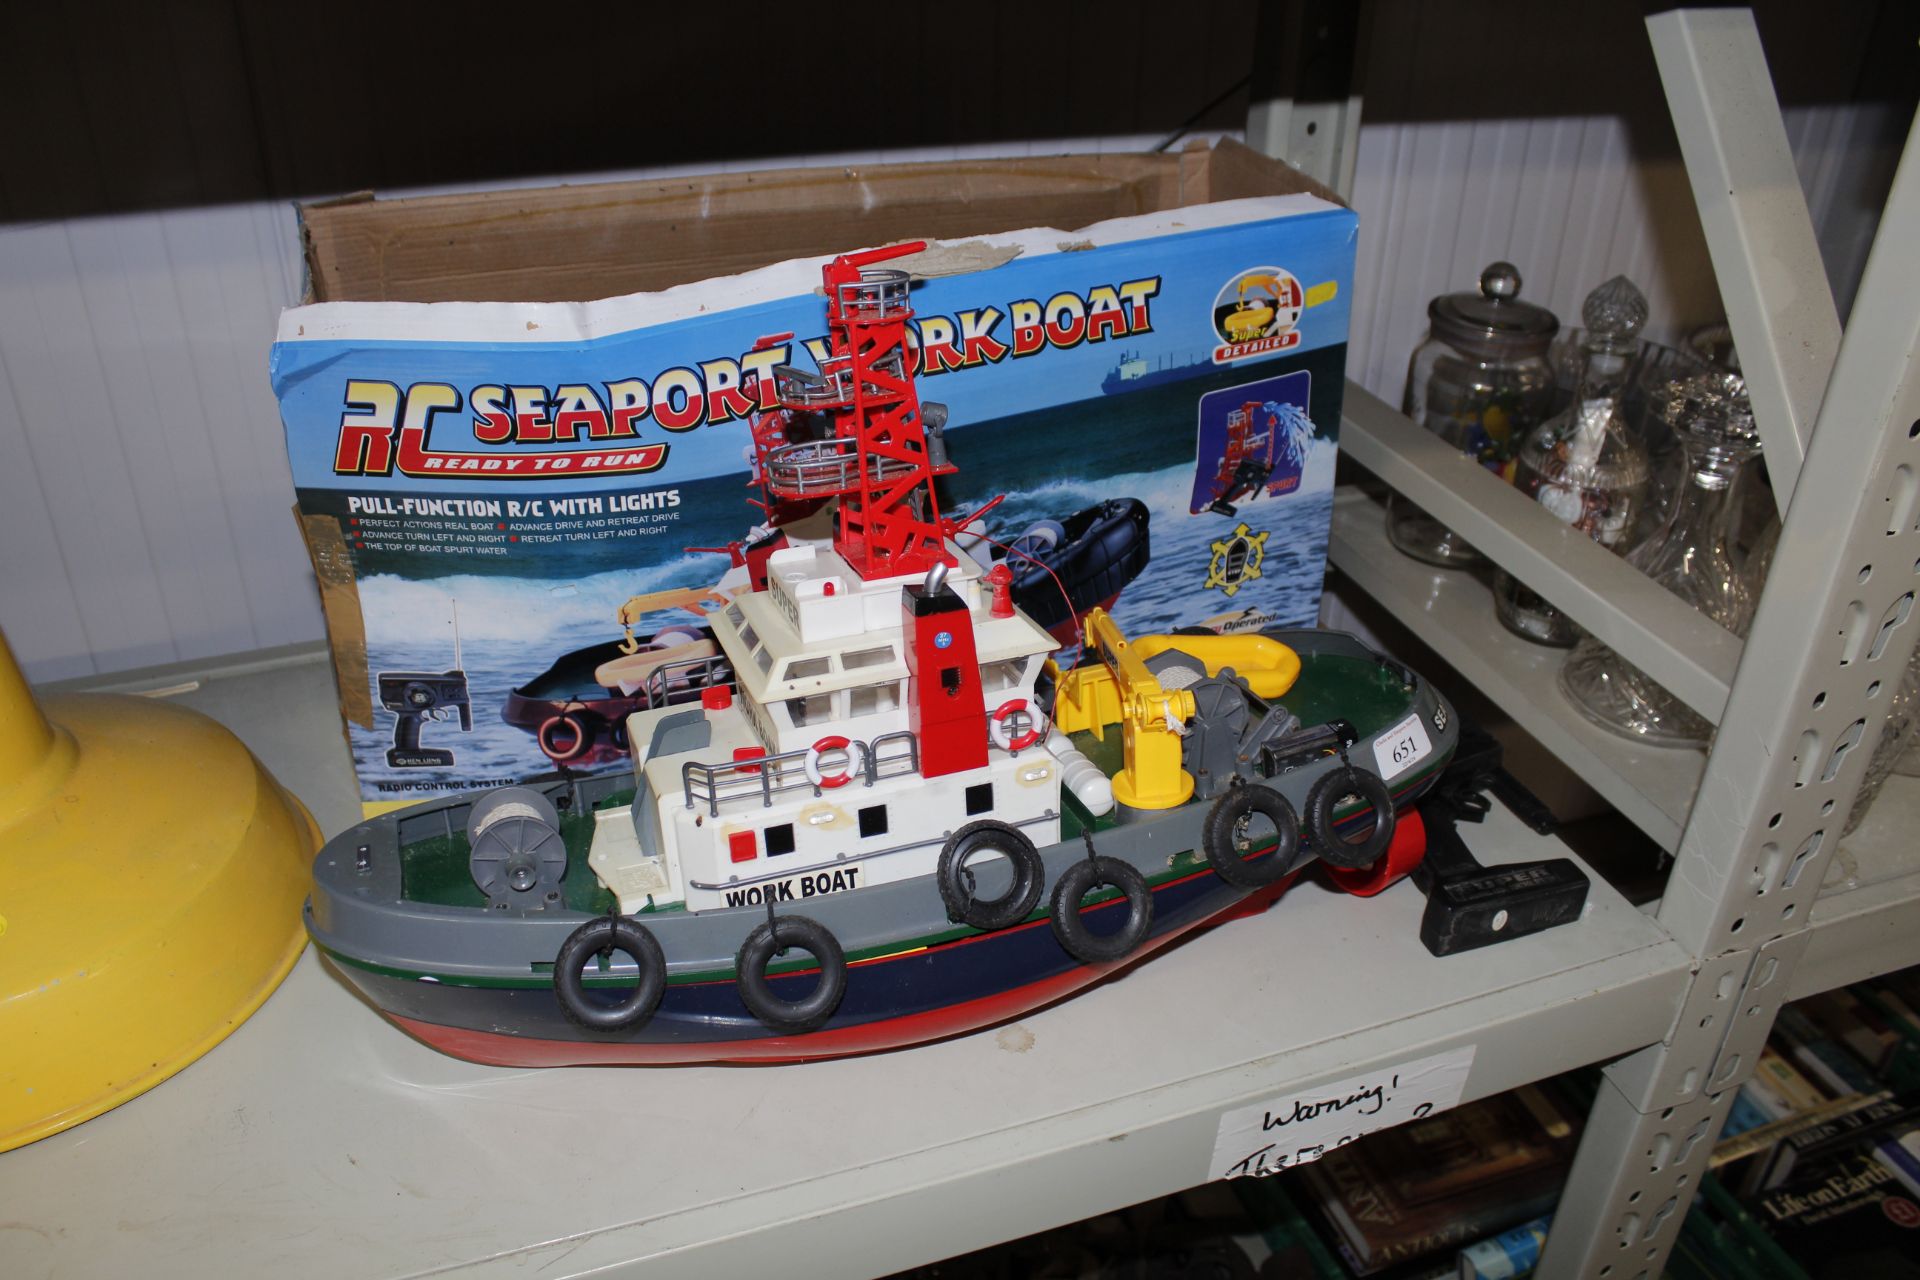 A radio controlled Seaport workboat